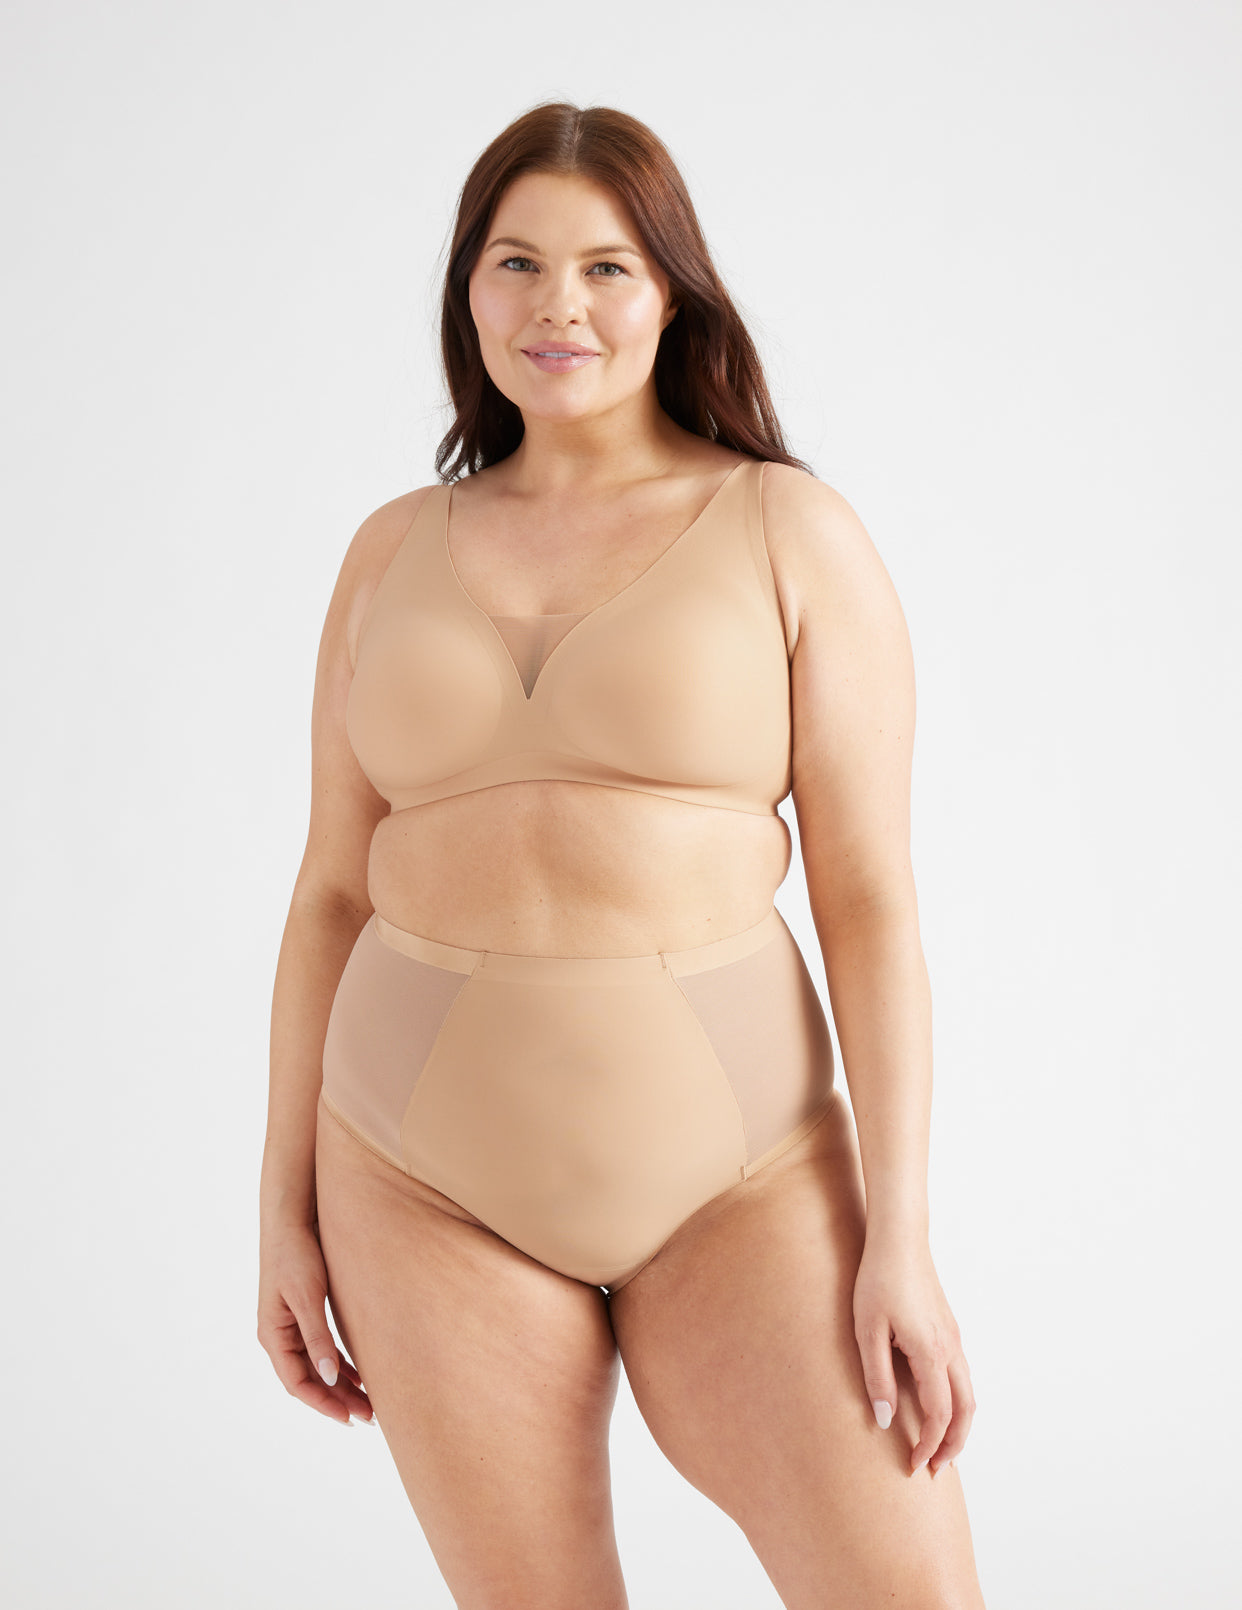 Ottavia has 44" hips and wears a Knix size L 